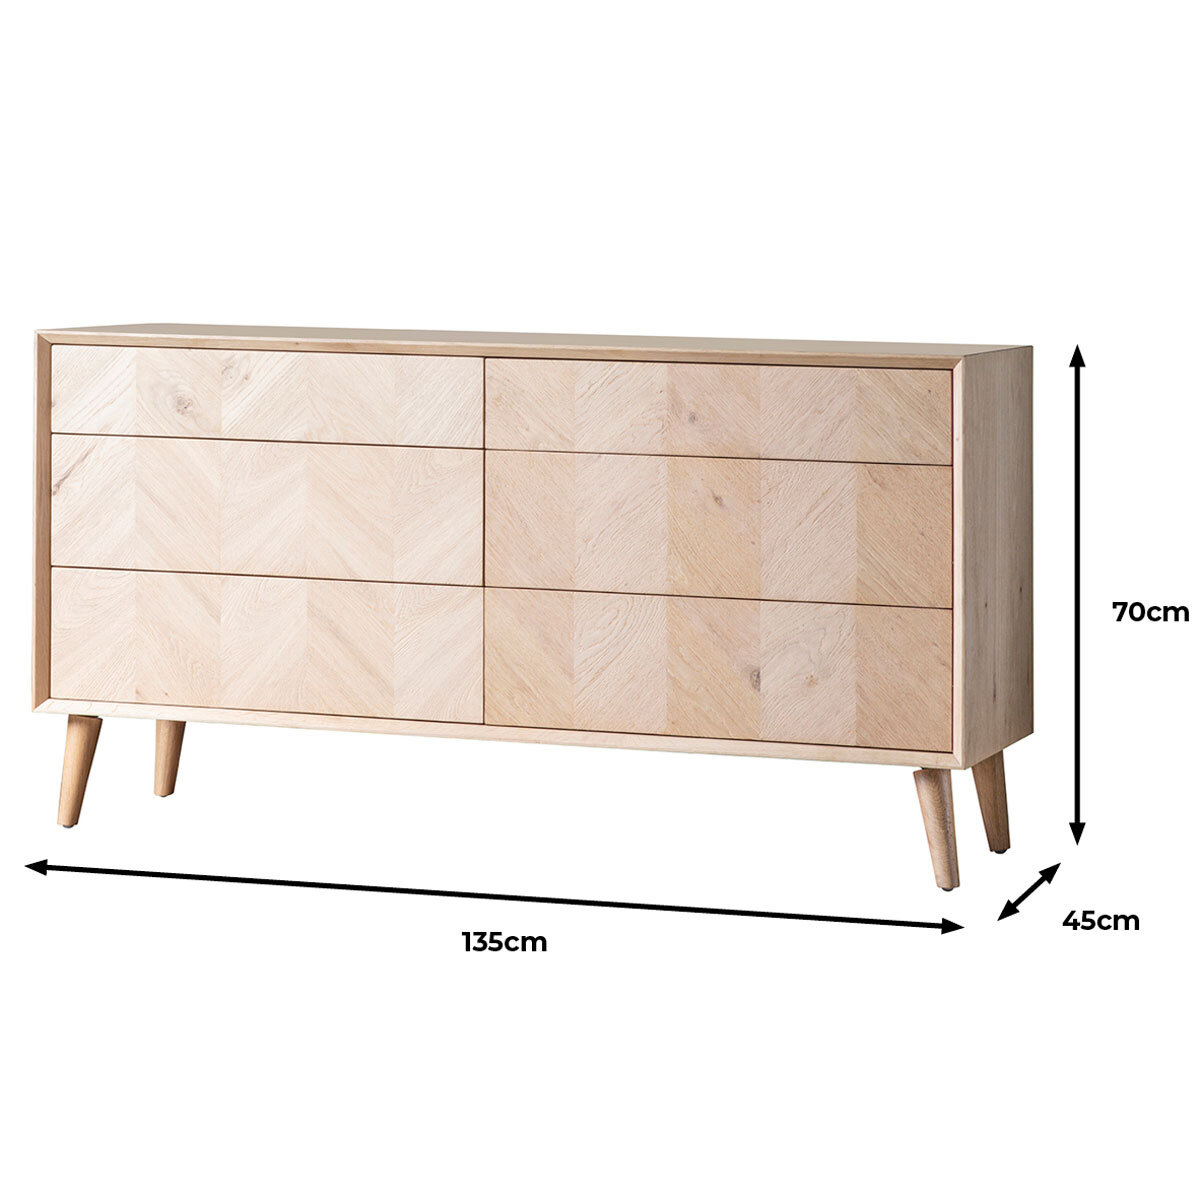 Gallery Milano Oak 6 Drawer Chest of Drawers